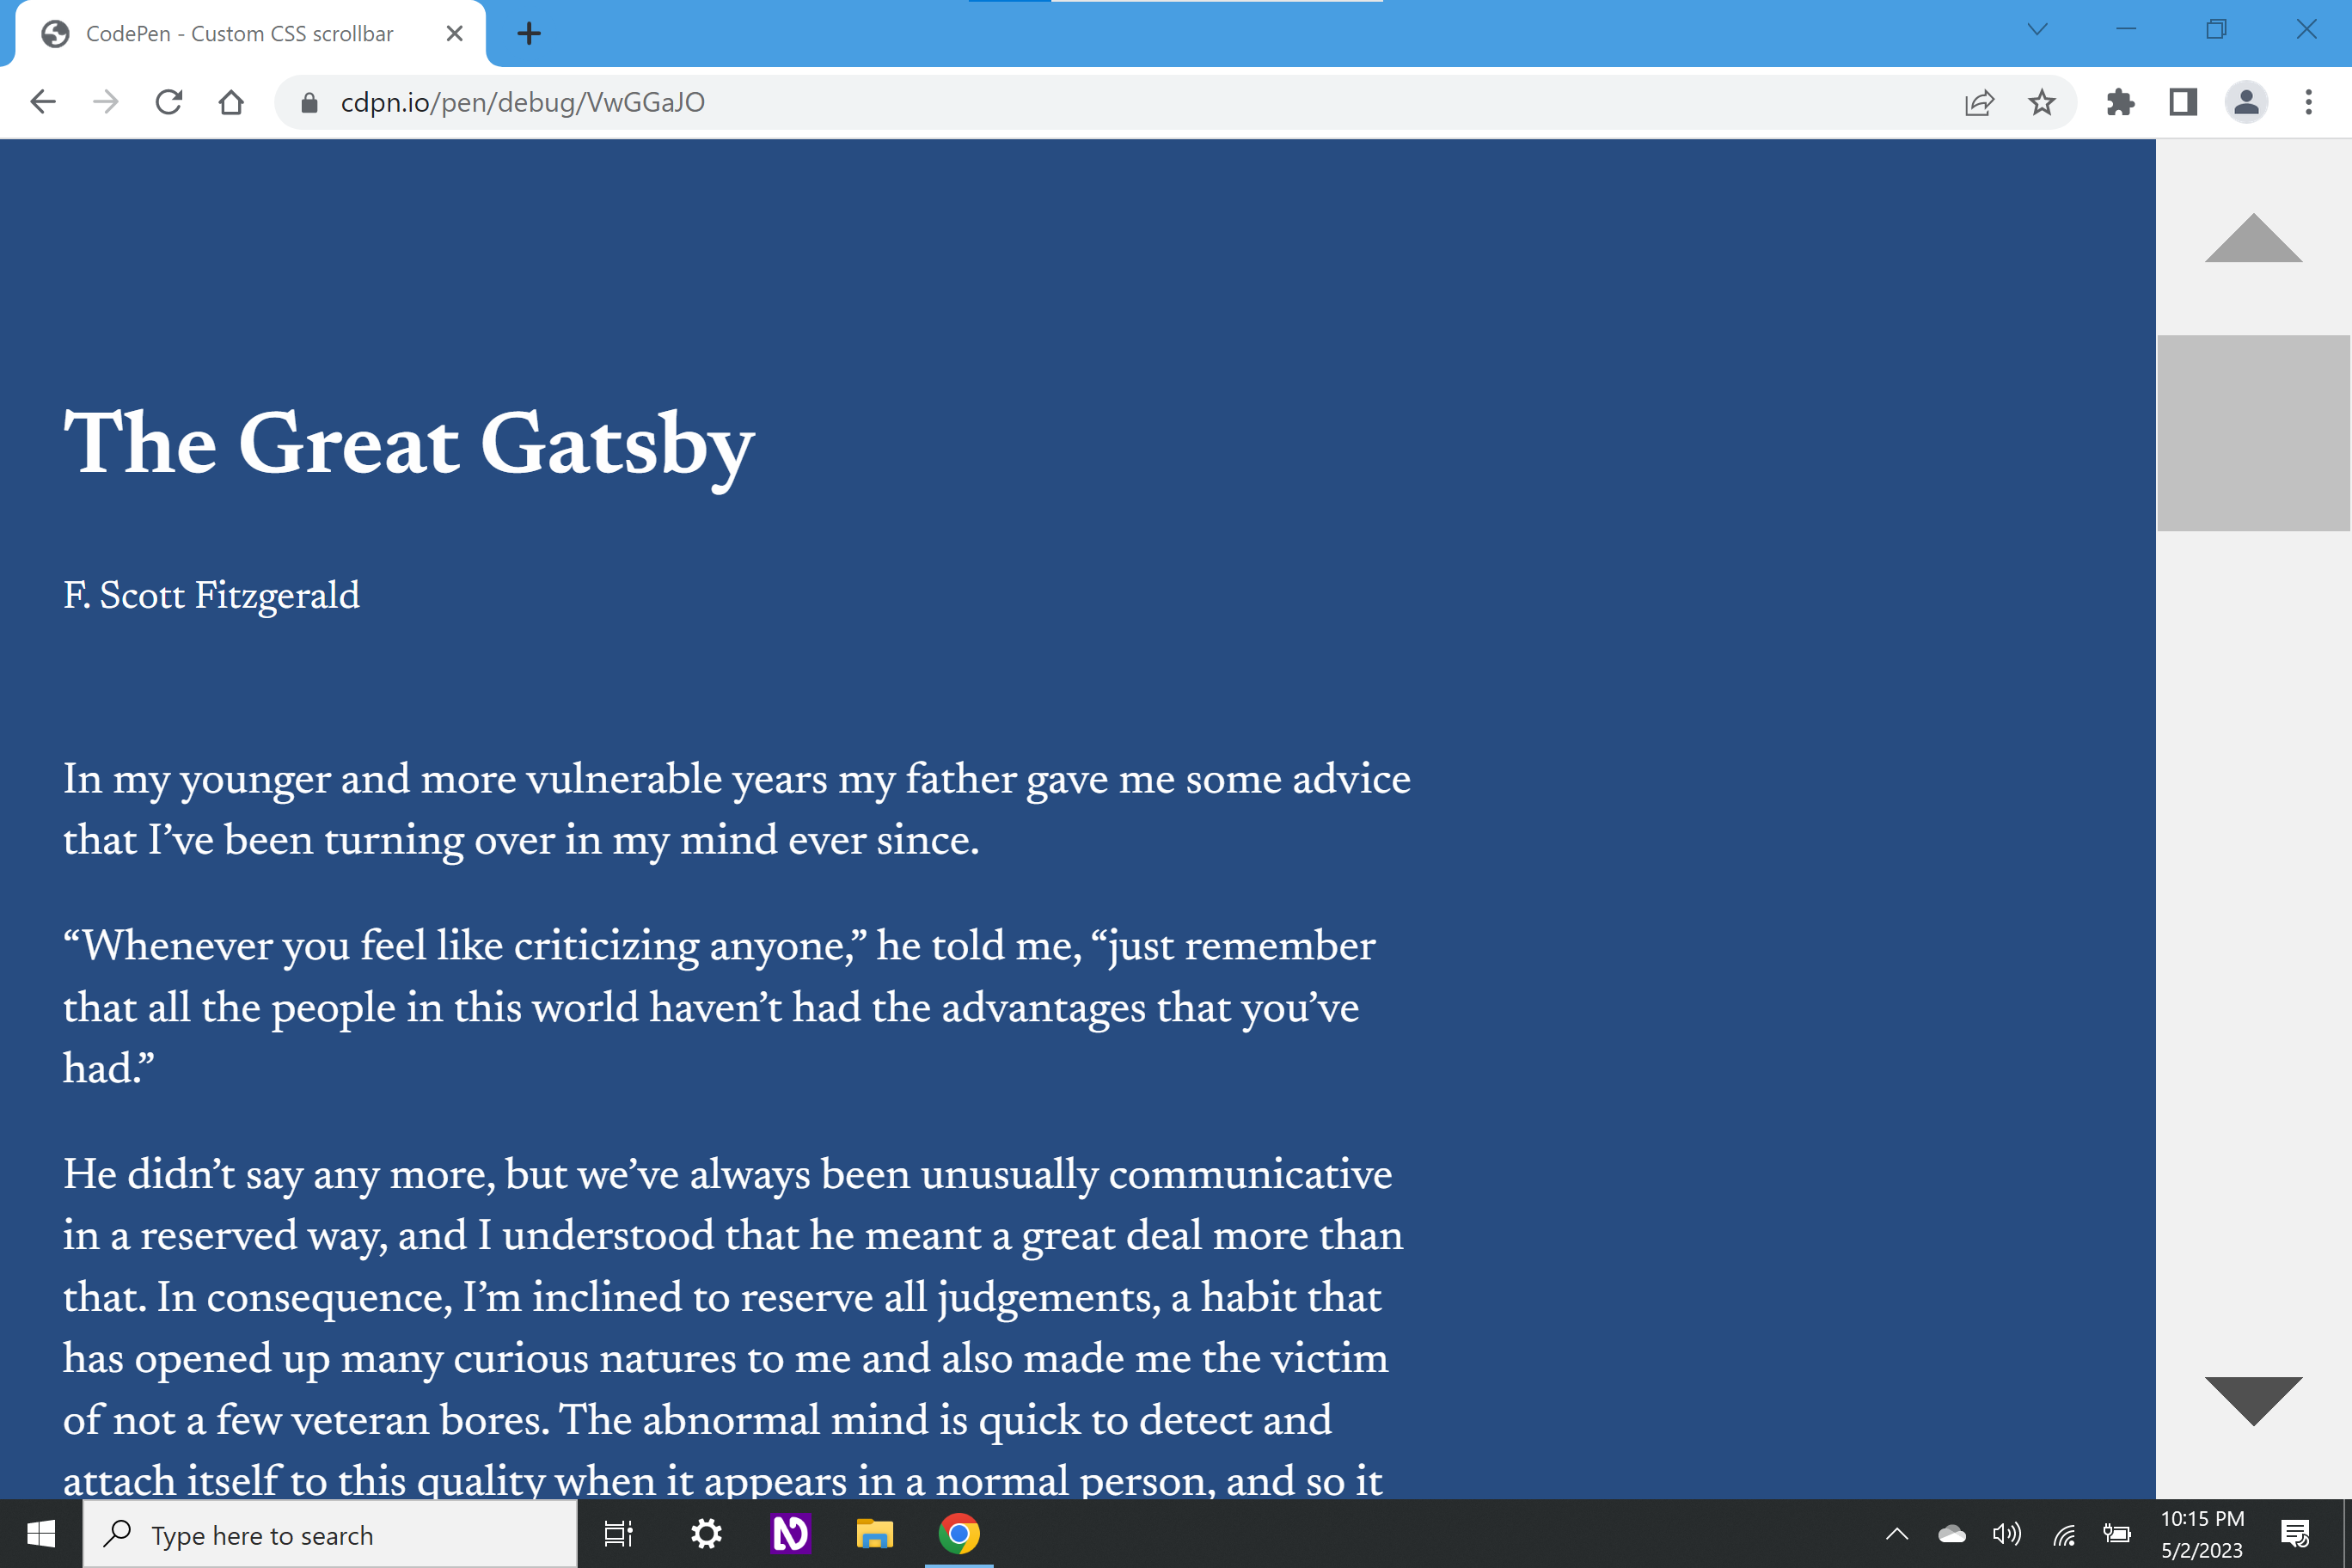 Chrime with a tab open to a CodePen set the display opening text to The Great Gatsby. The scrollbar's width takes up about 10% of the screen. Screenshot.